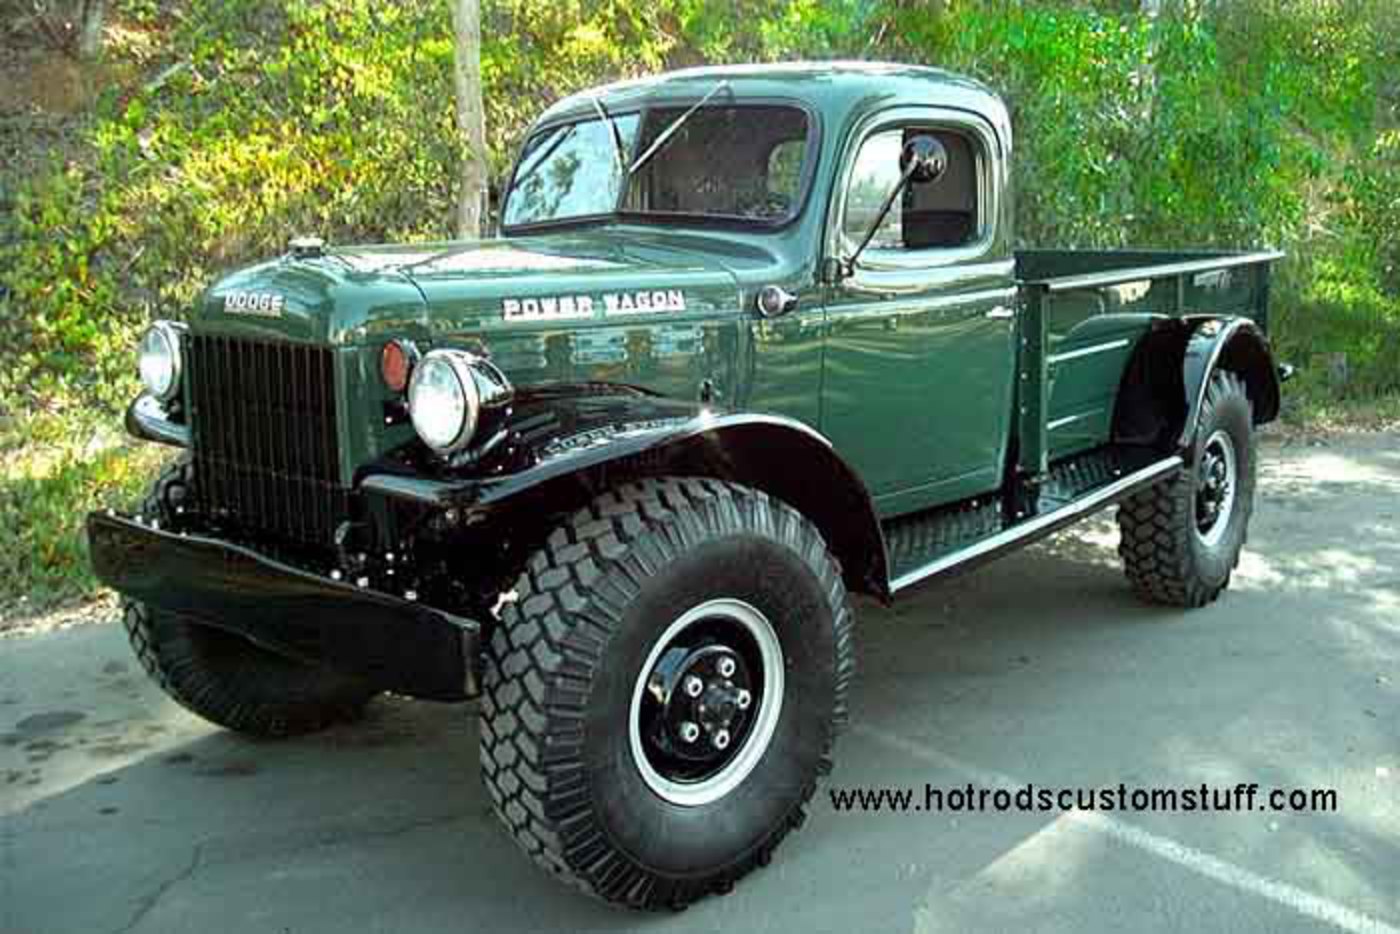 Dodge Power Wagon M series. View Download Wallpaper. 700x467. Comments